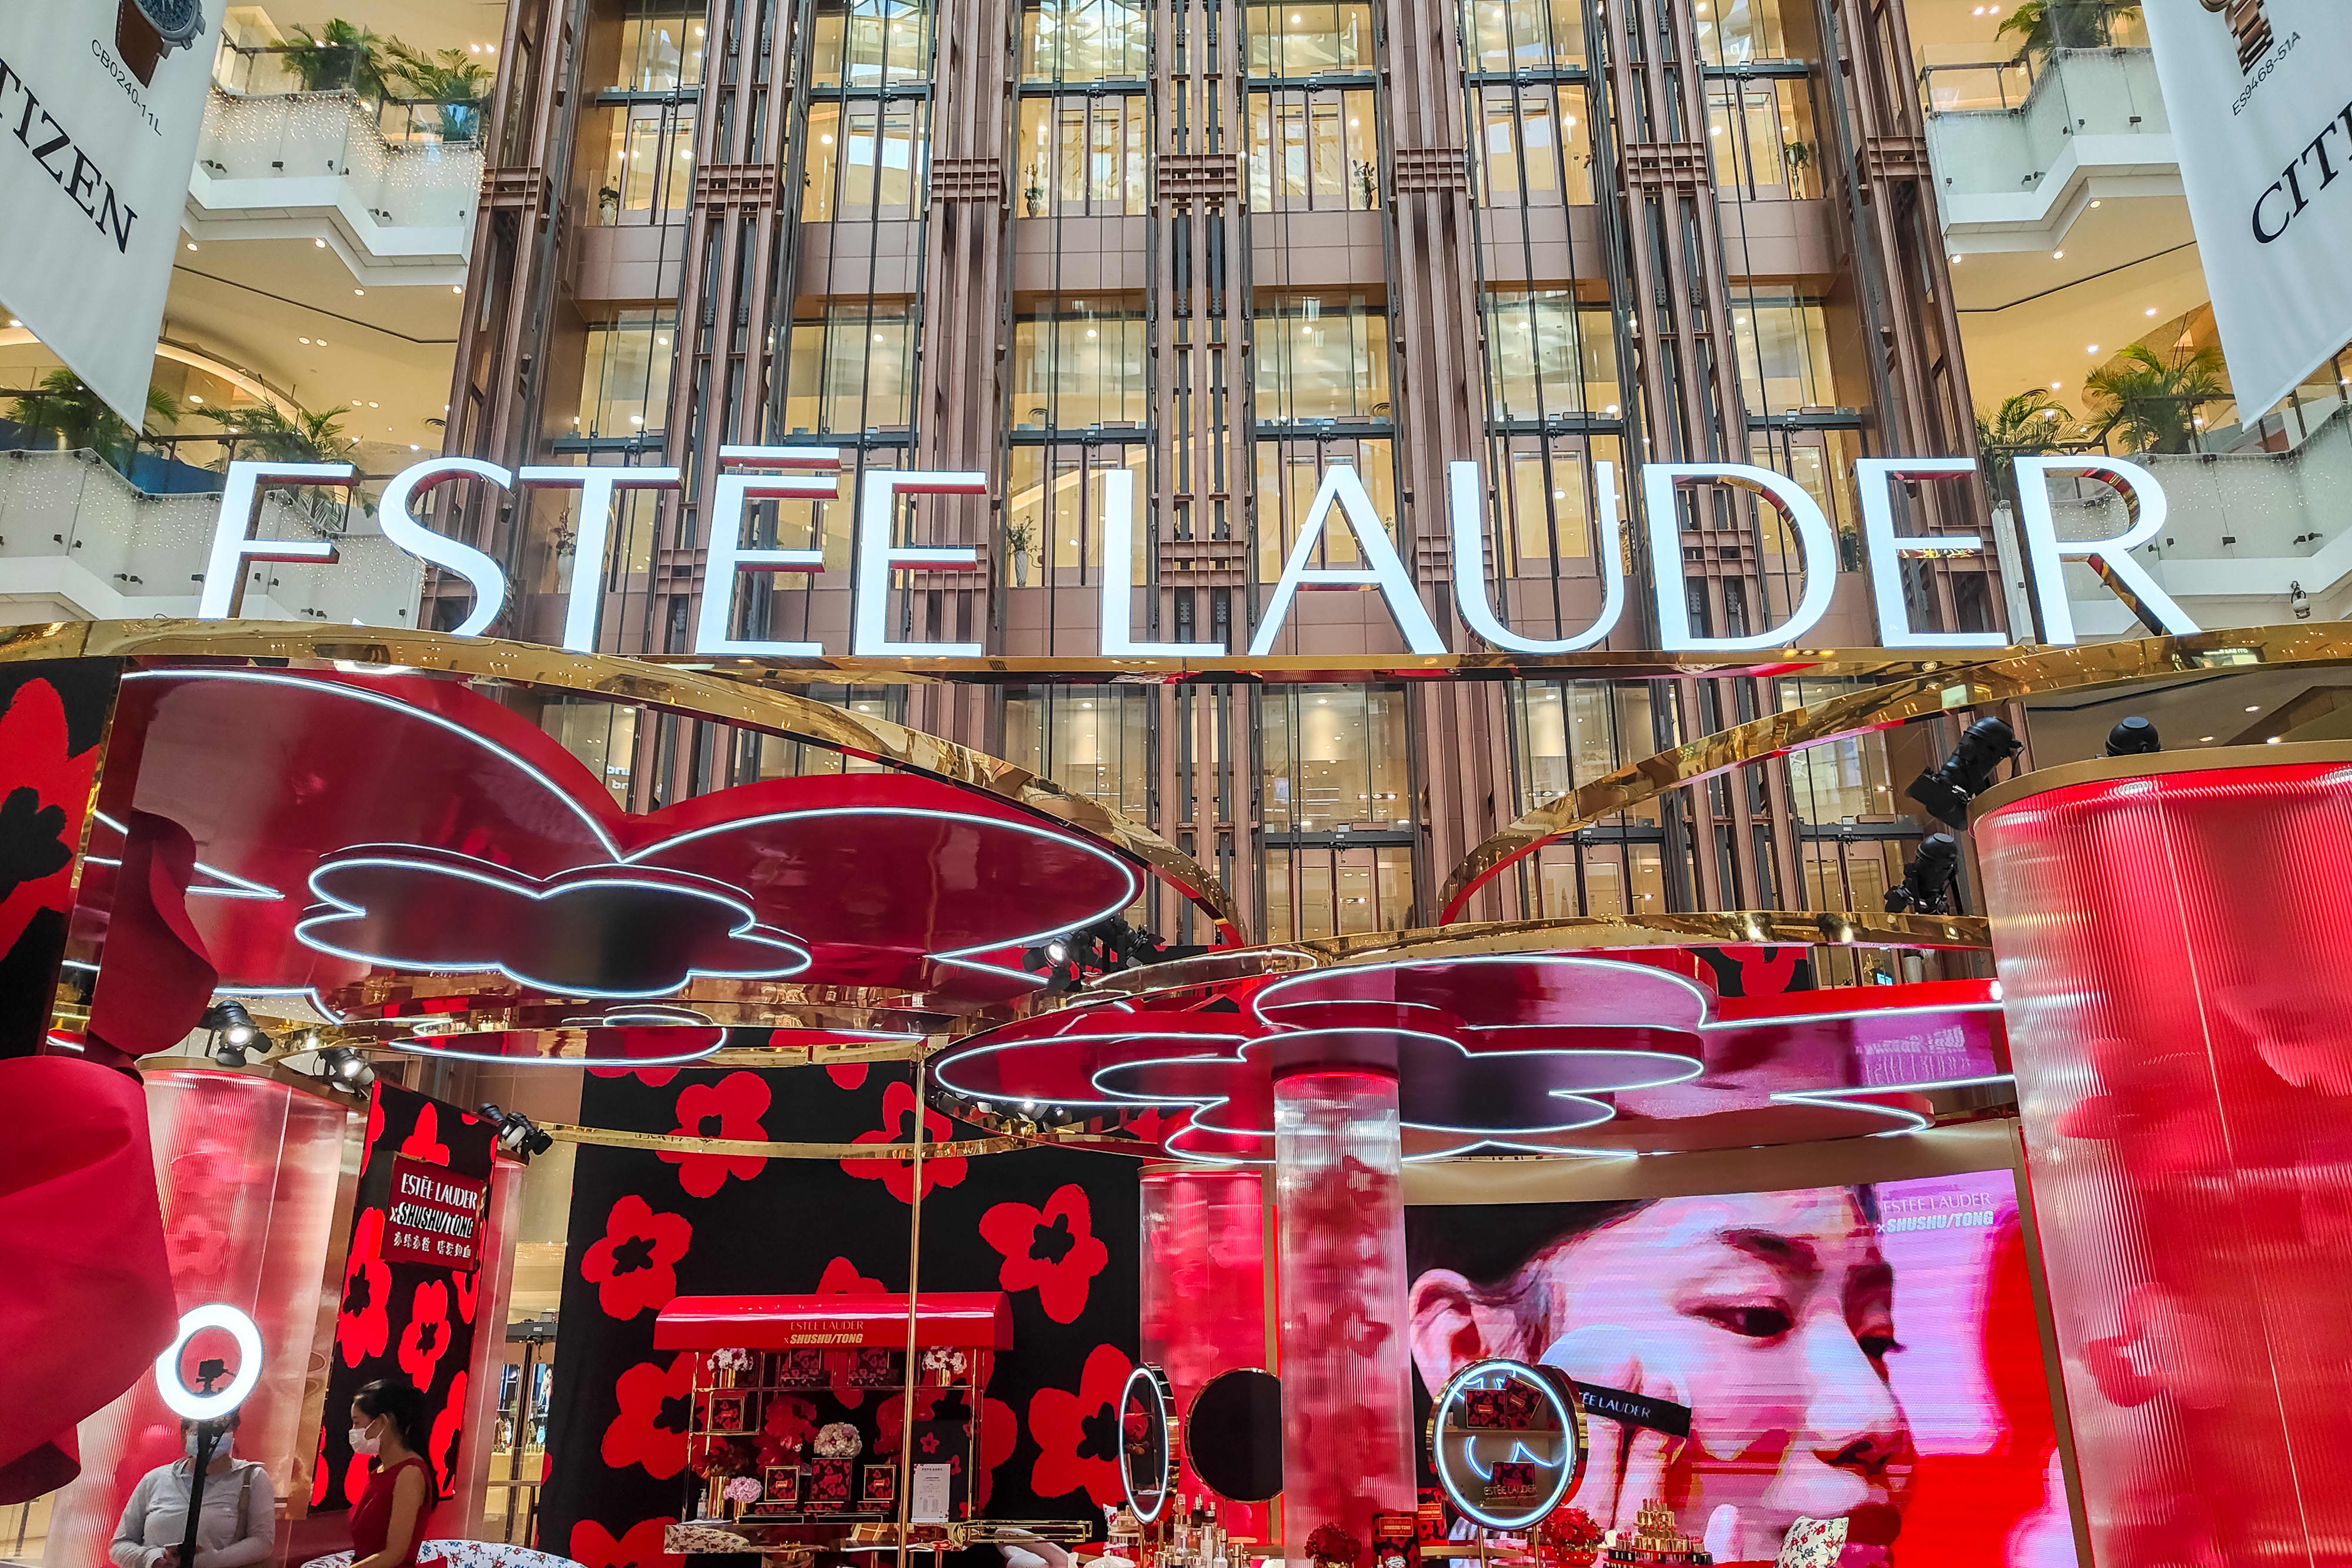 Estee Lauder's latest Wall Street endorsement underscores our long-held view on the company